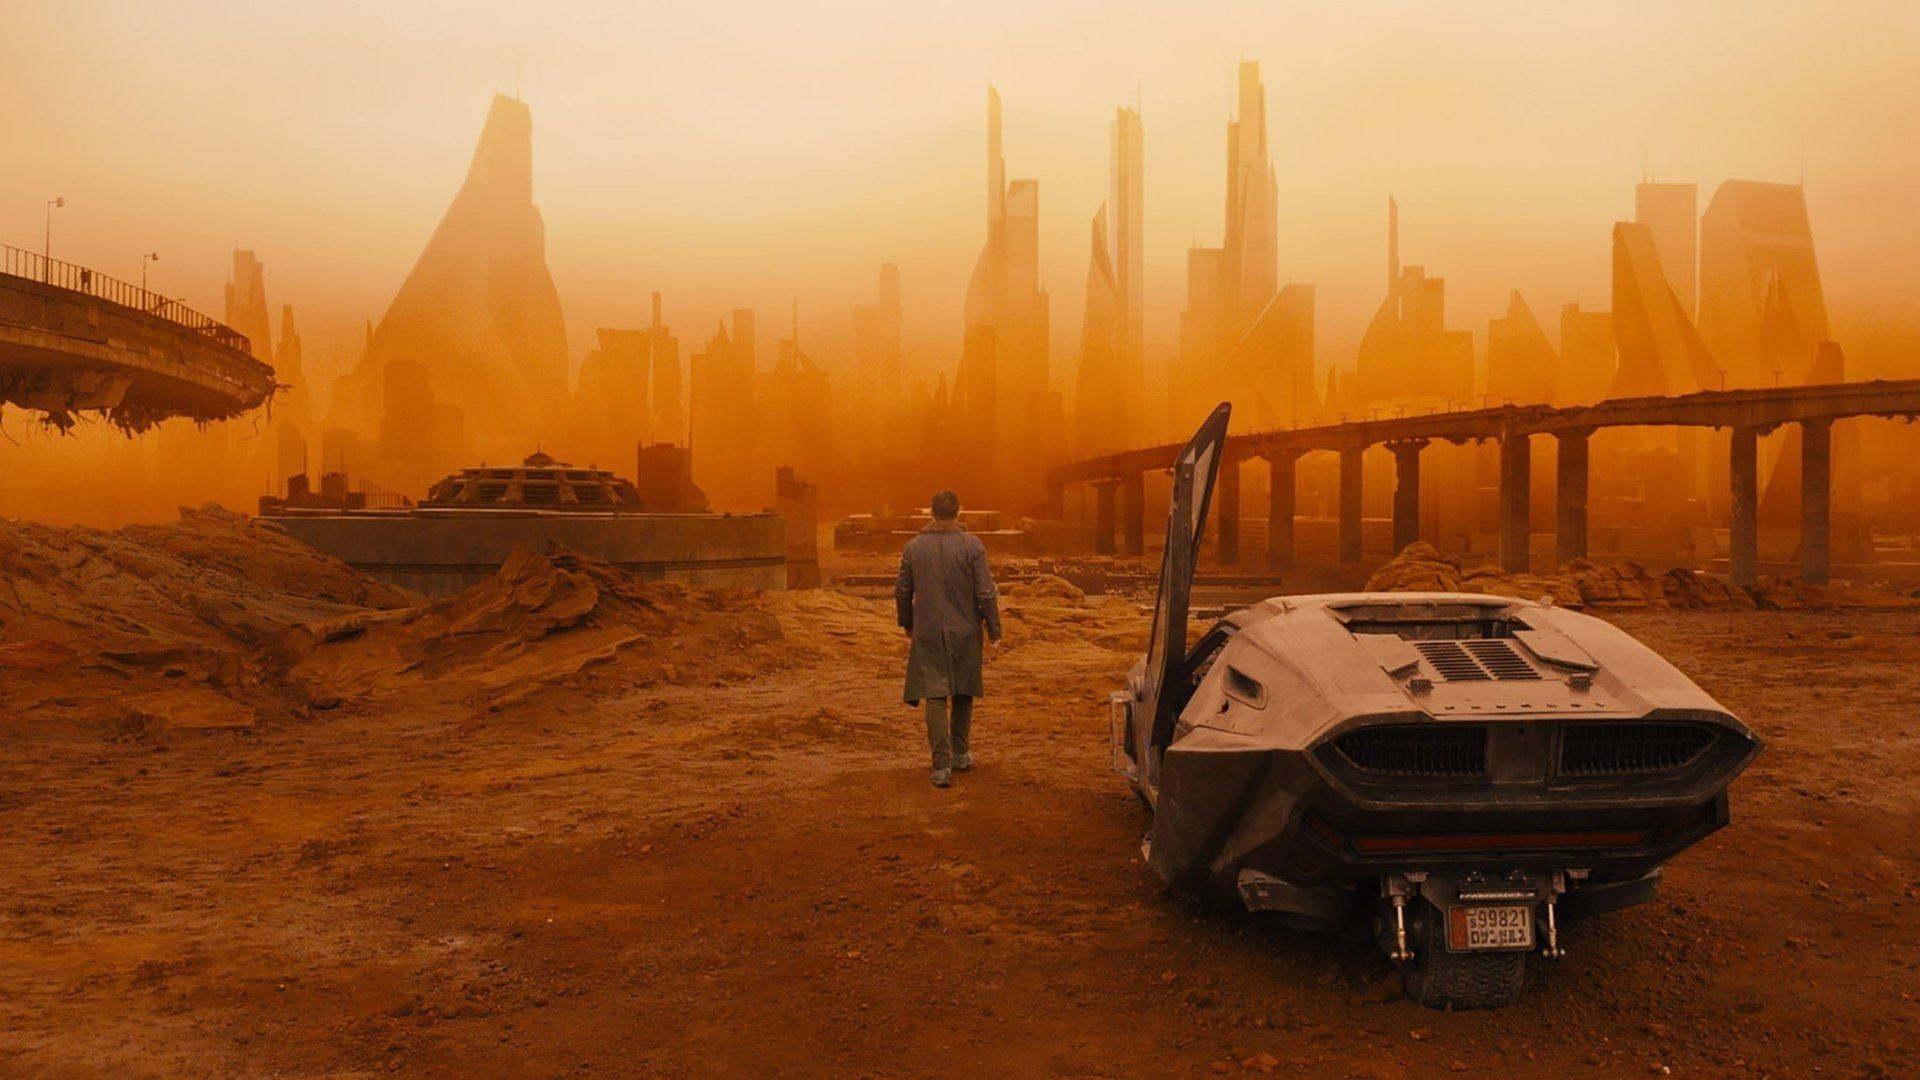 A tumultuous future awaits us in the Blade Runner 2049 filled with a doomed city. Wallpaper